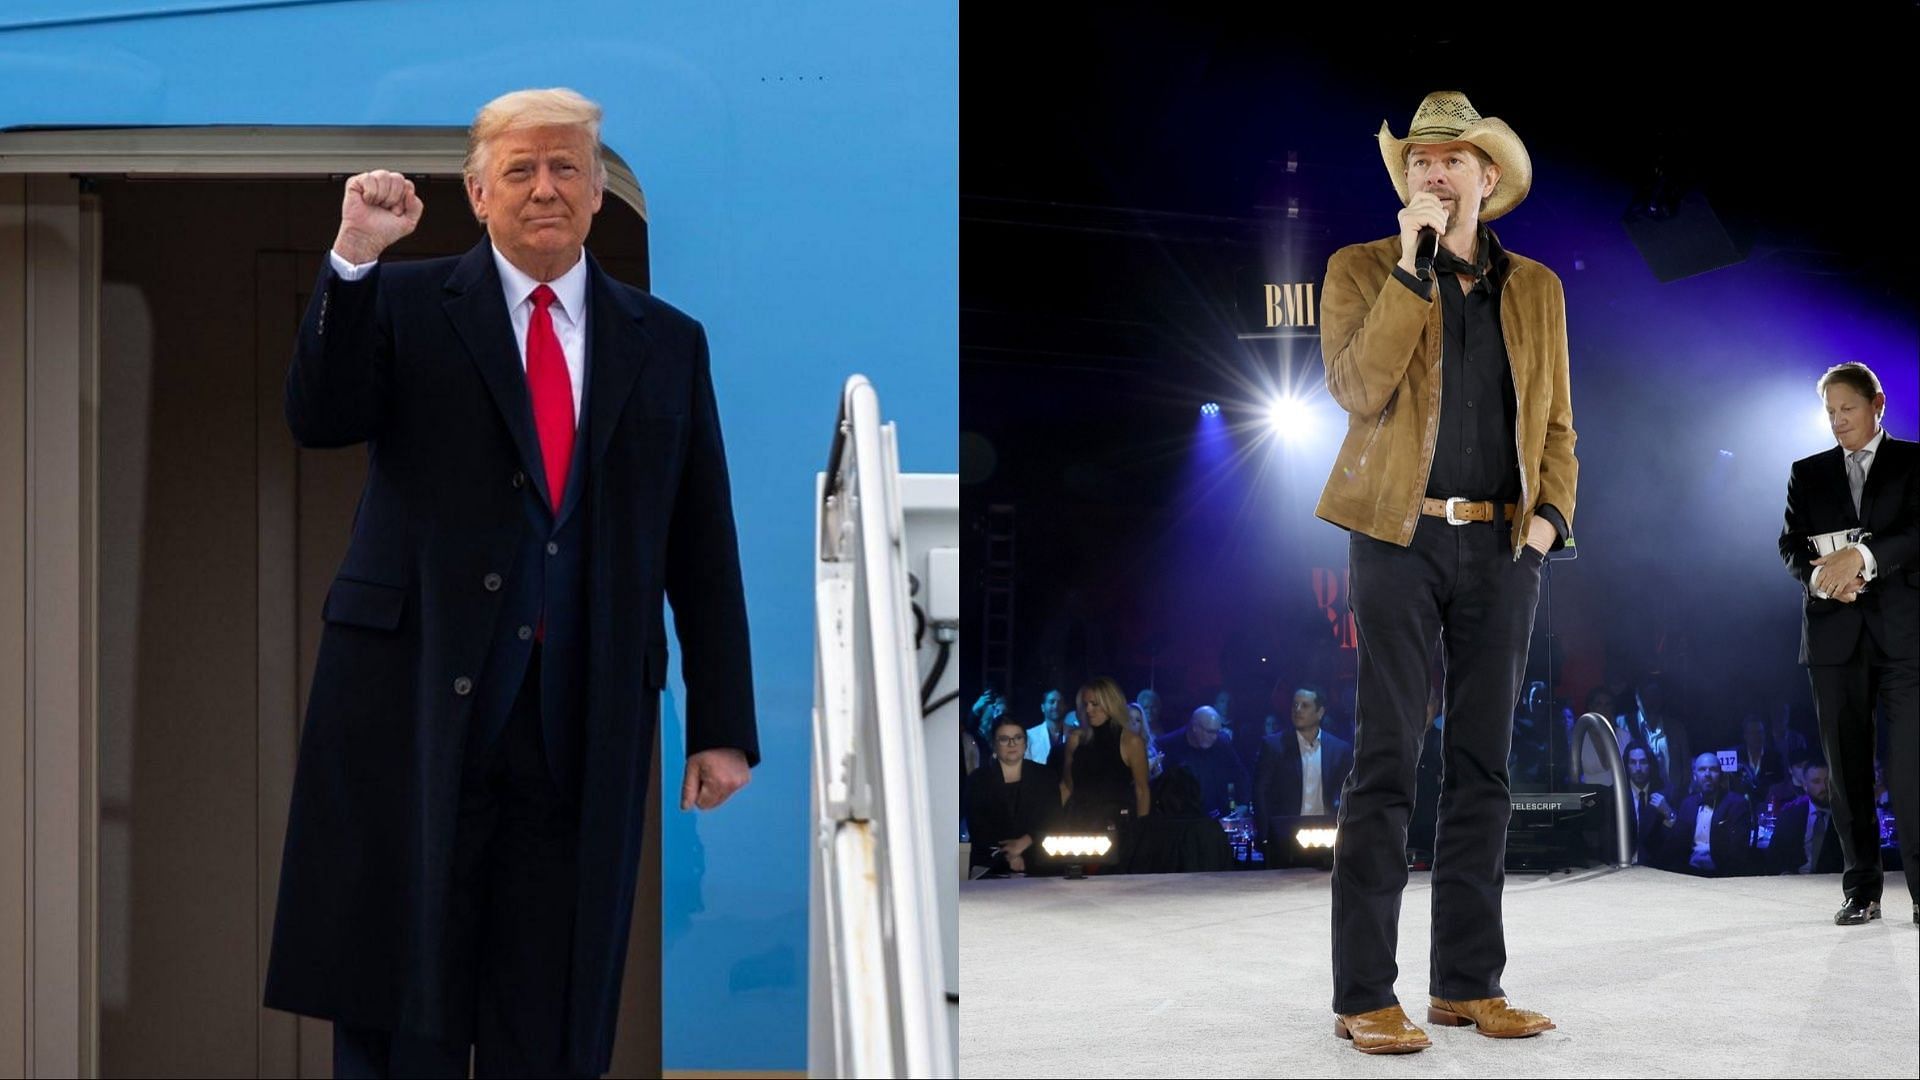 Internet users have tagged Keith as a Trump supporter (Image via Facebook / Donald J. Trump / Toby Keith)